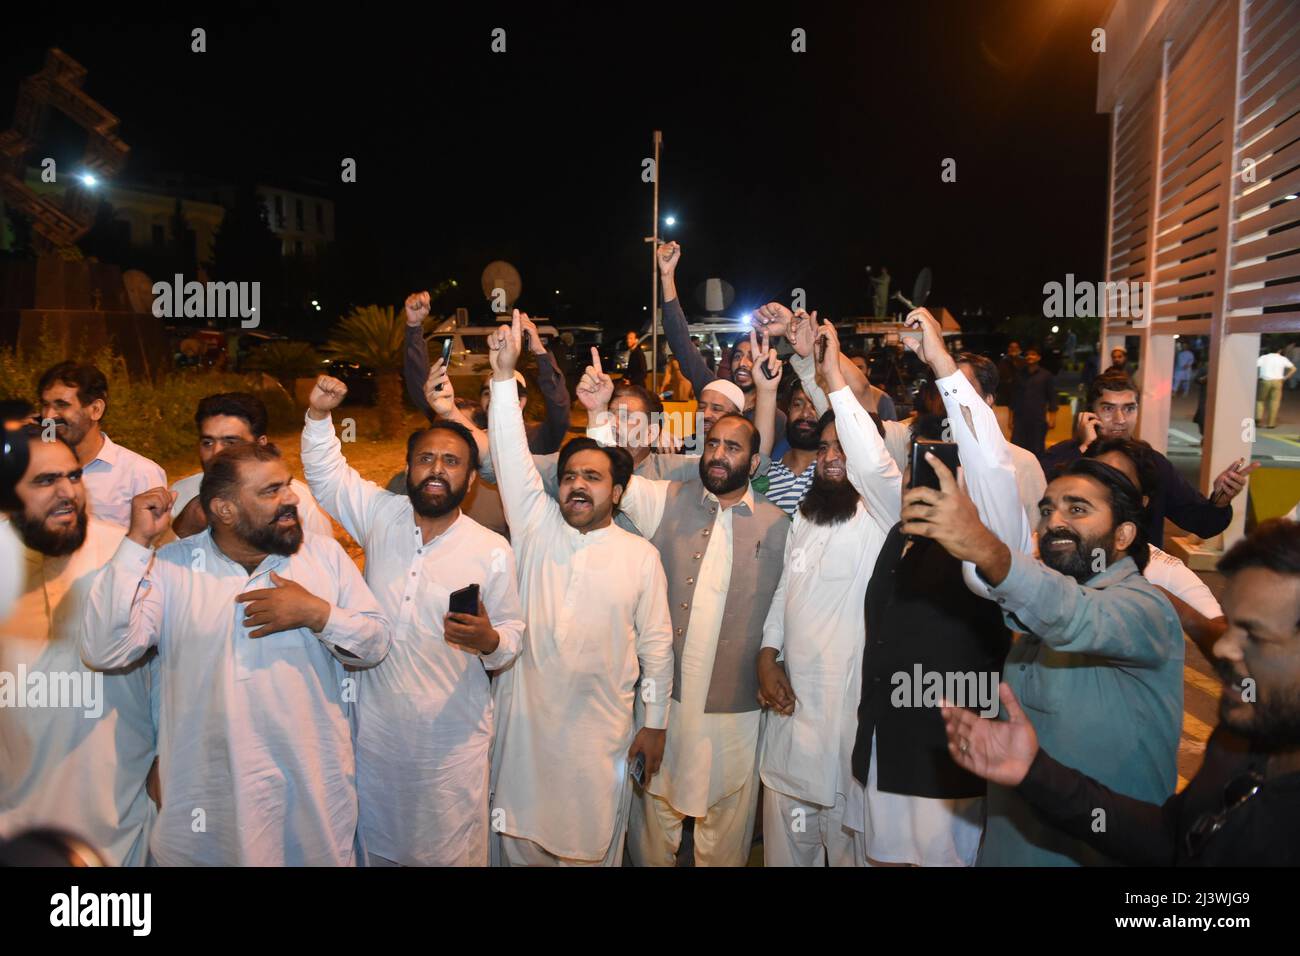 April 10, 2022, Islamabad, Pakistan: People gather in front of parliament building after Pakistan's parliament voted out Prime Minister Imran Khan in a no-confidence motion late Saturday, capping a month-long political turmoil that gripped the nation of 220 million, in Islamabad, Pakistan, on April 09, 2022. As many as 174 lawmakers voted in favor of the no-trust motion, two more than the required 172 for a simple majority in the 324-member National Assembly, the lower house of parliament. It is the first time a Pakistani prime minister has ever been ousted by a no-confidence motion put forwar Stock Photo